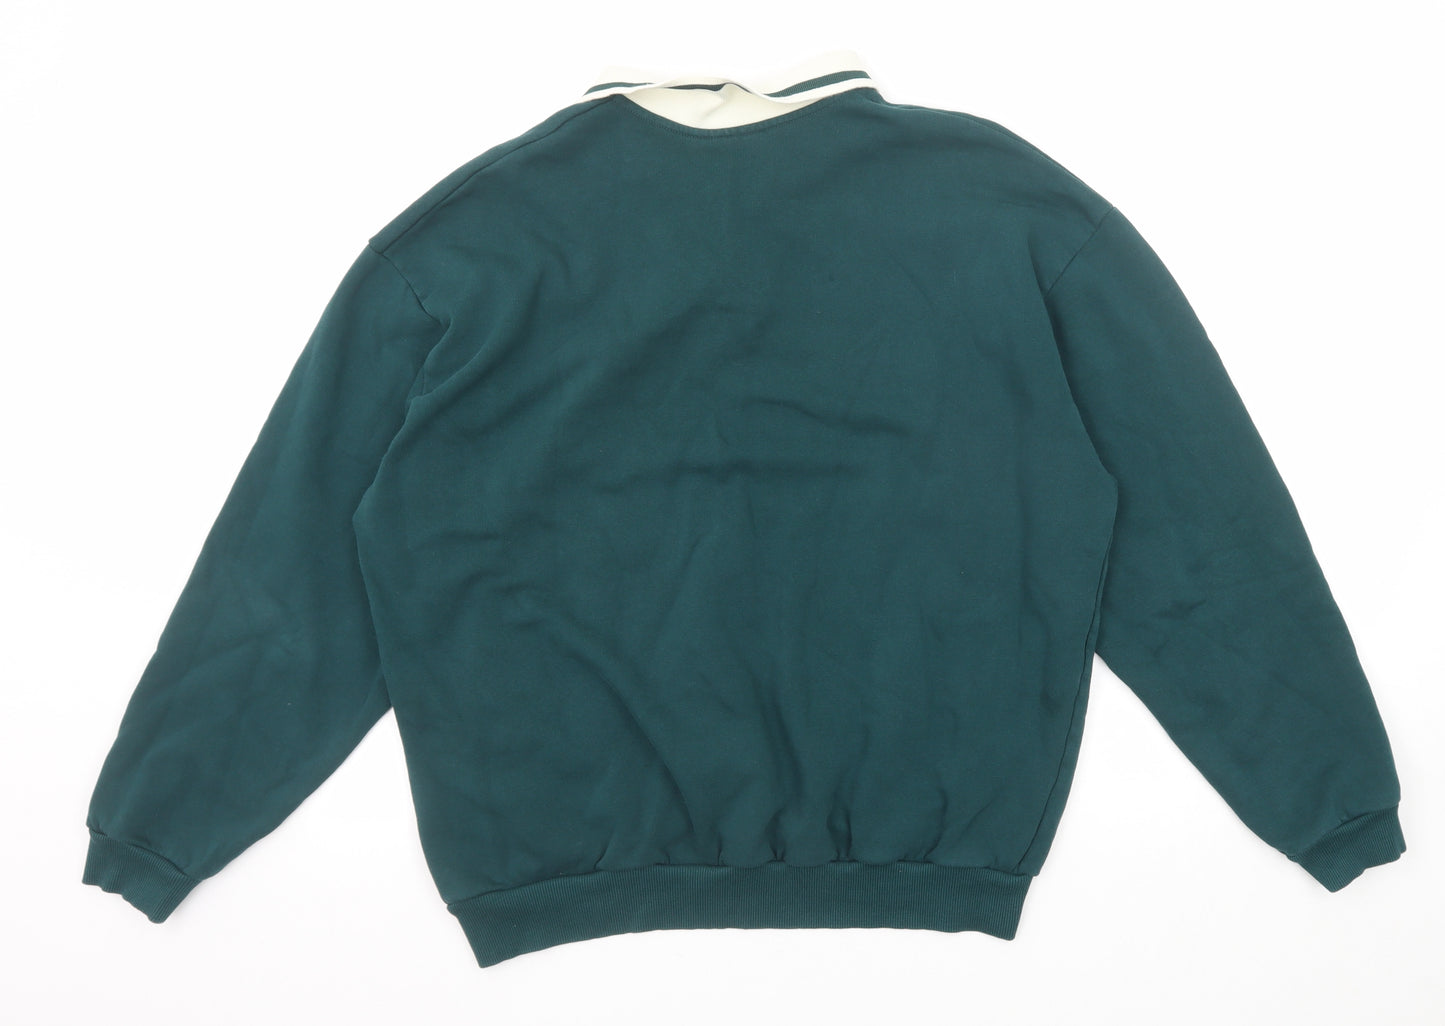 ASOS Mens Green Collared Cotton Pullover Jumper Size M Long Sleeve